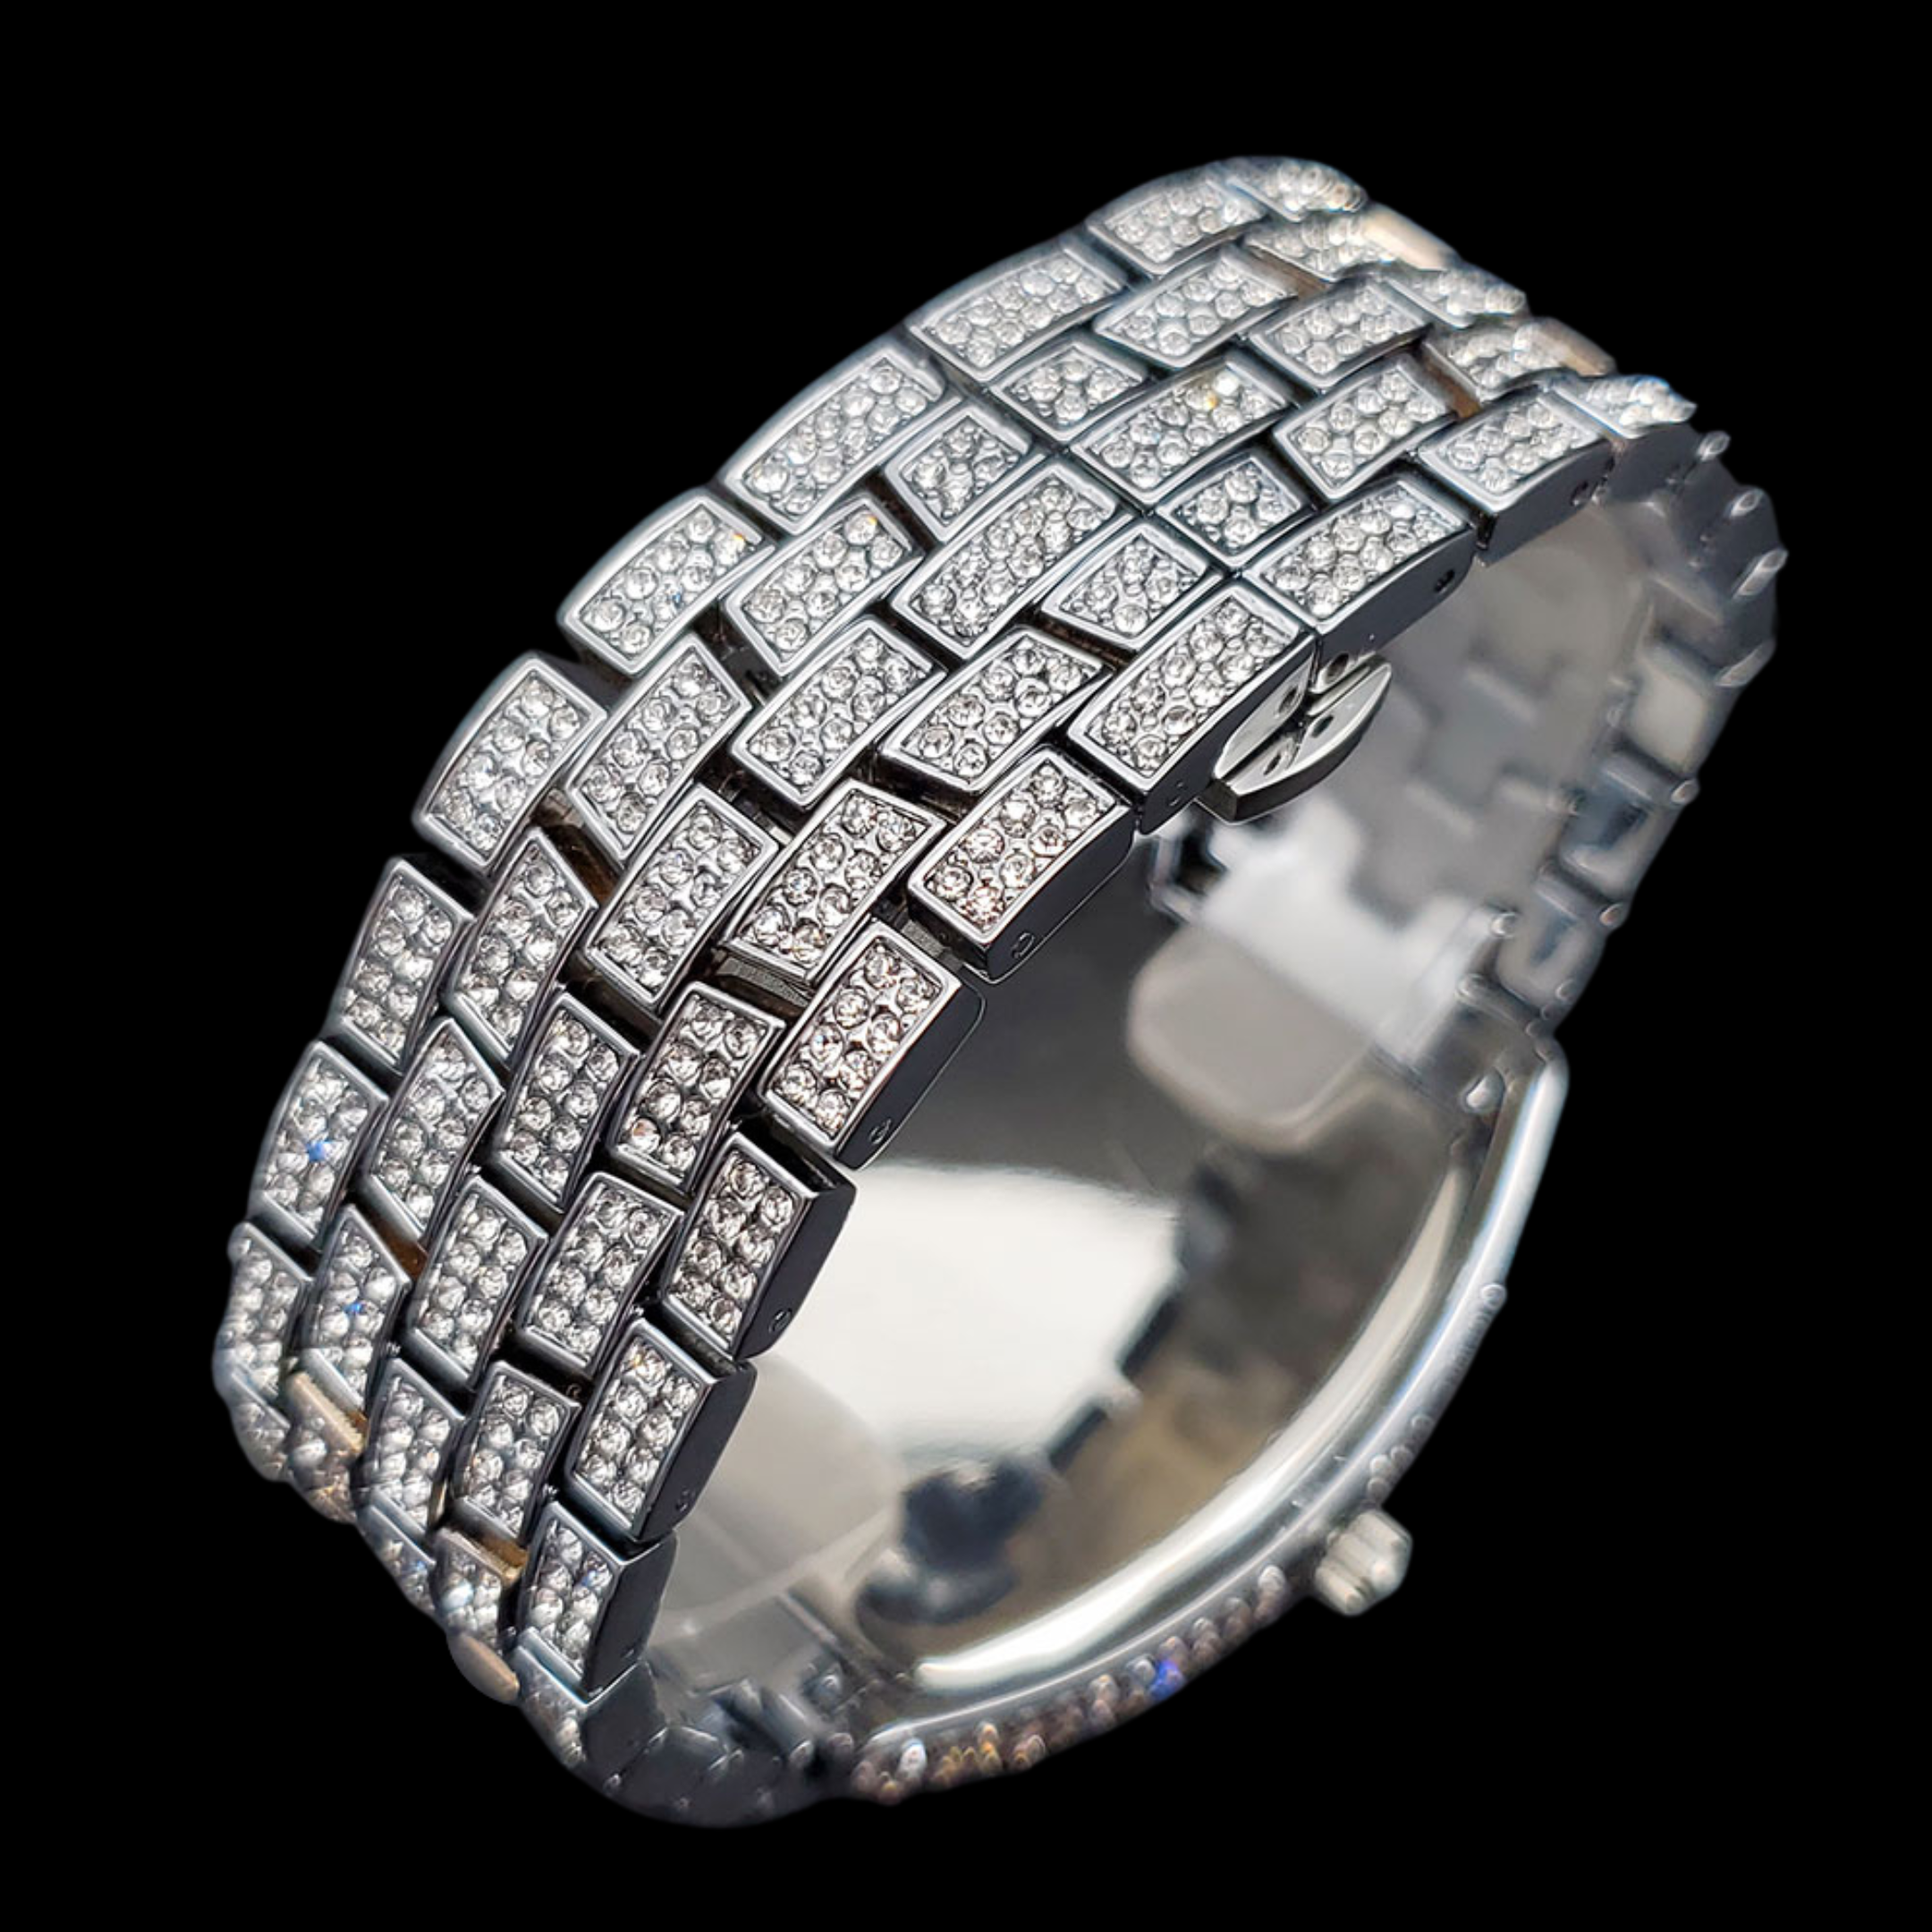 Luxury Star Sky Fully Diamond Bling Edition Iced Out Watch